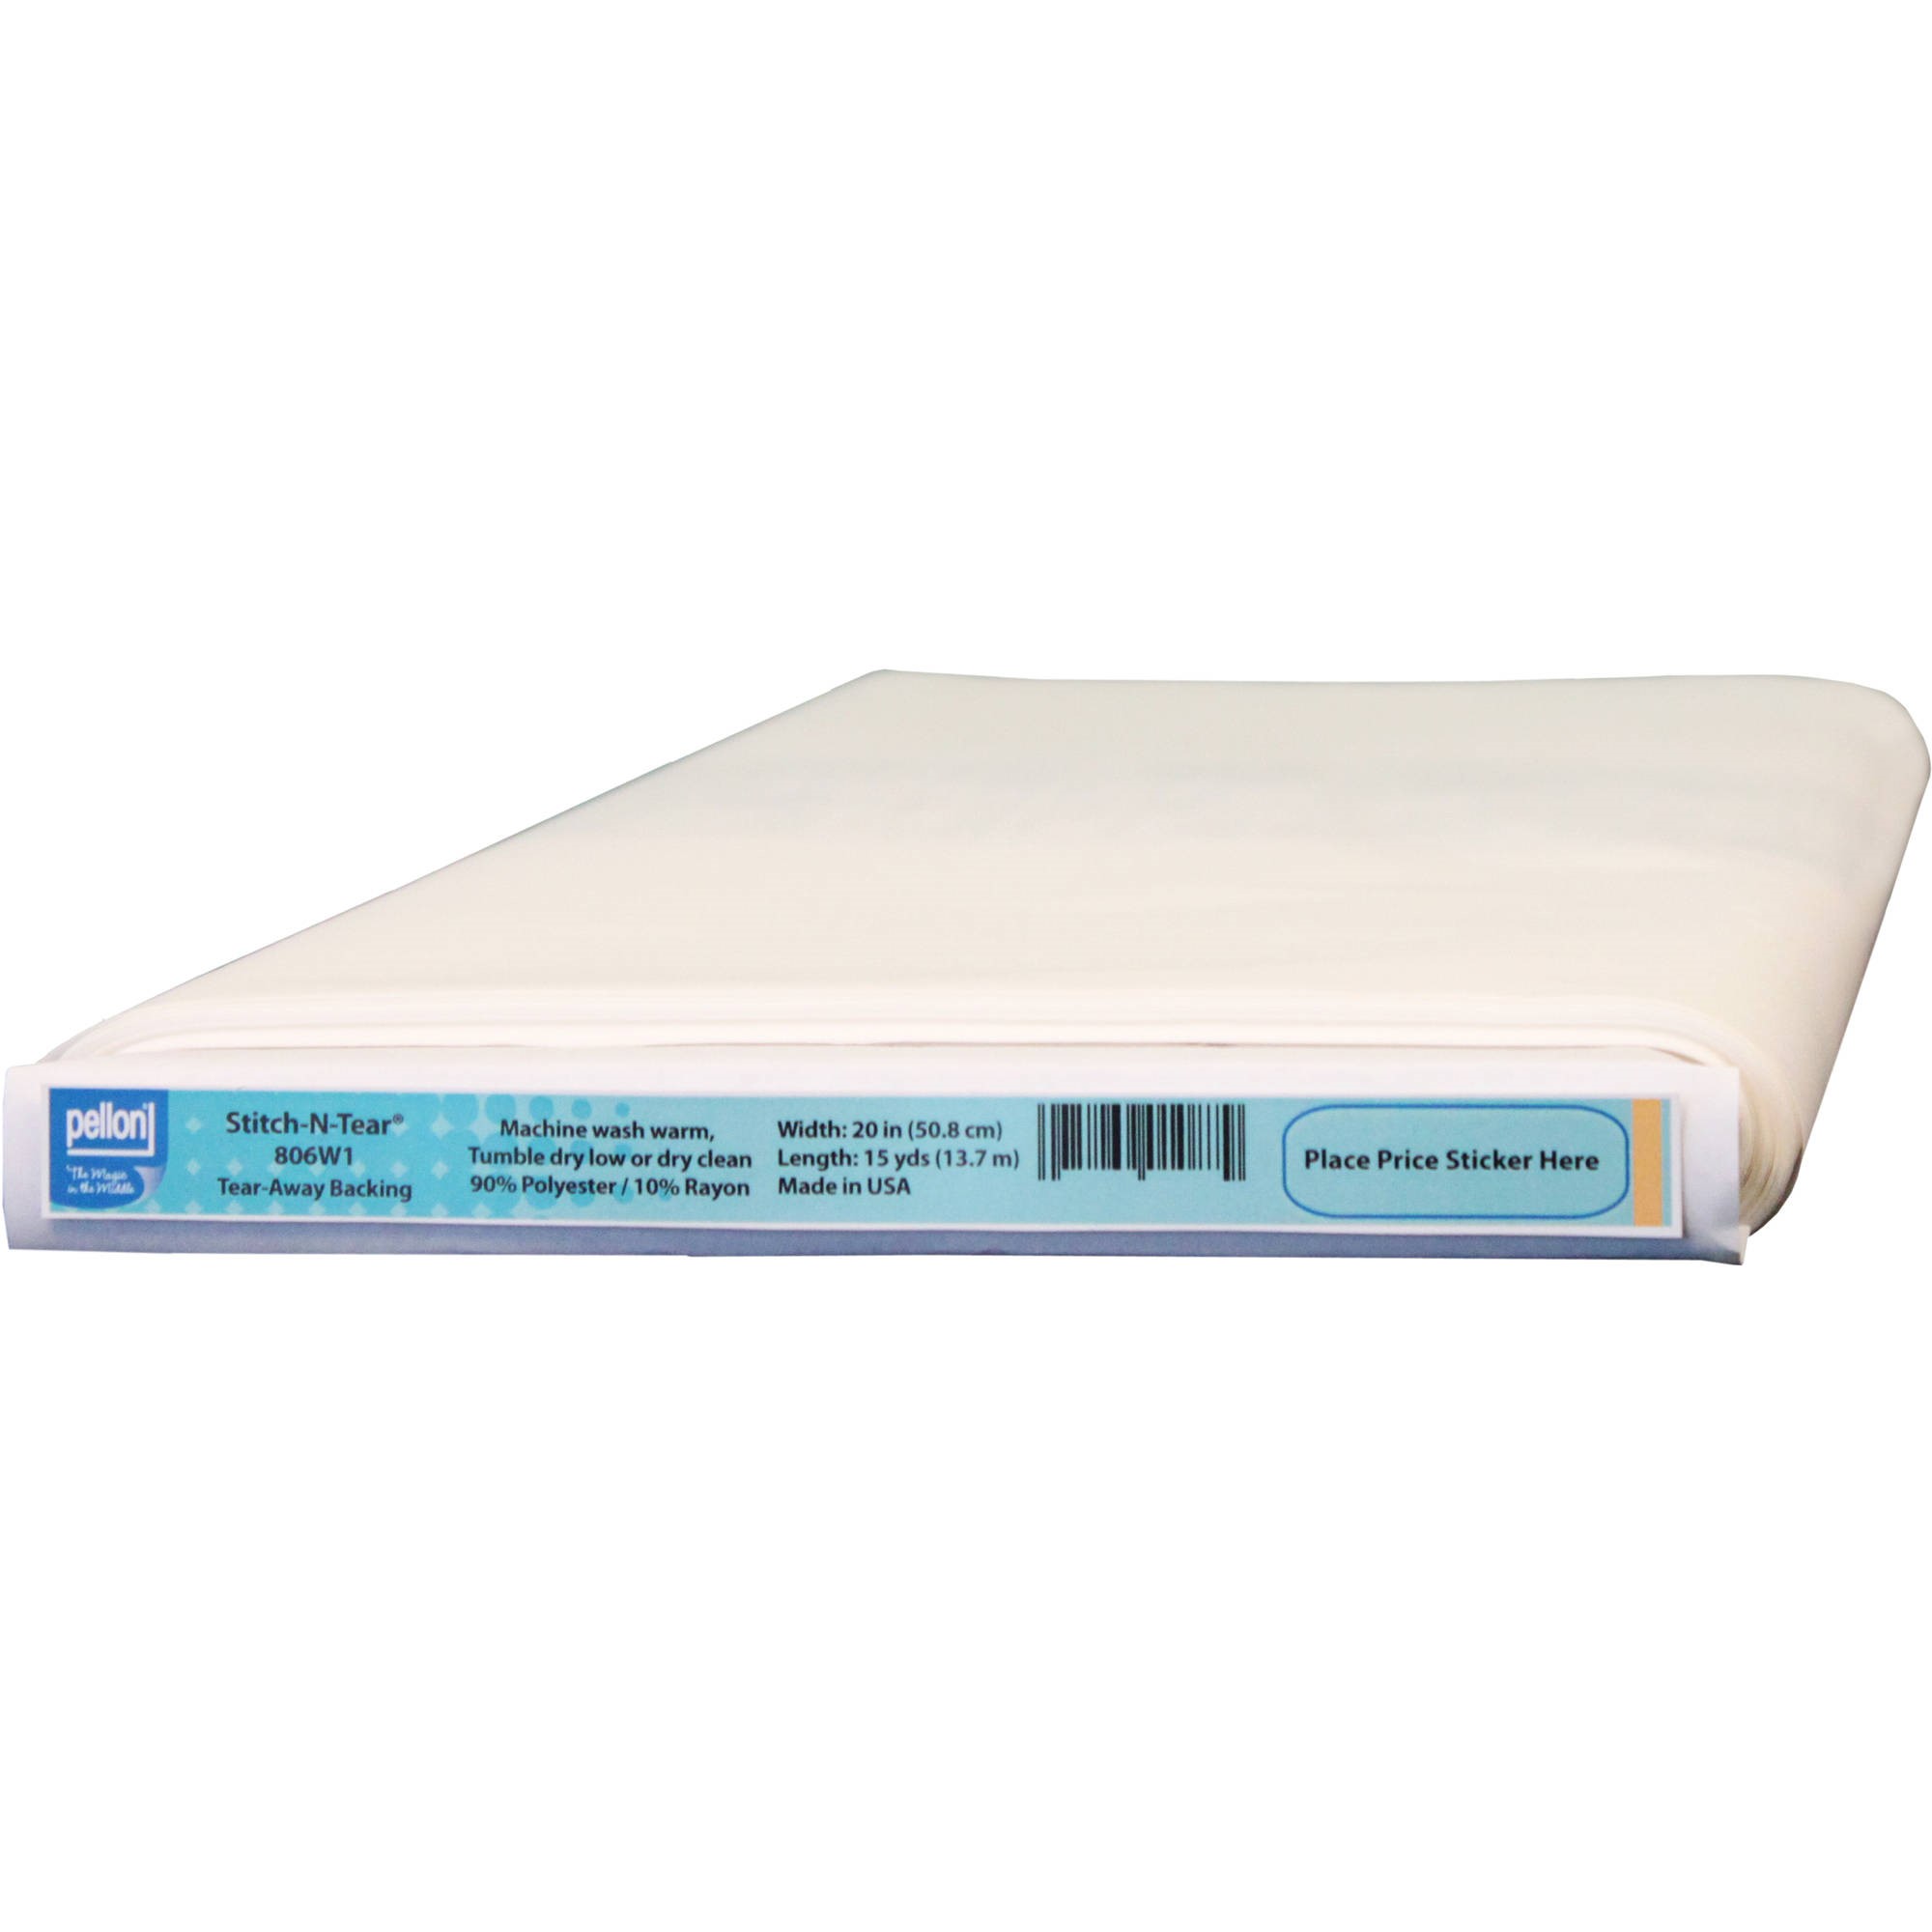 Pellon Stitch-N-Tear Fabric Stabilizer, White 20" x 15 Yards by the Bolt - 1 Pack - image 1 of 5